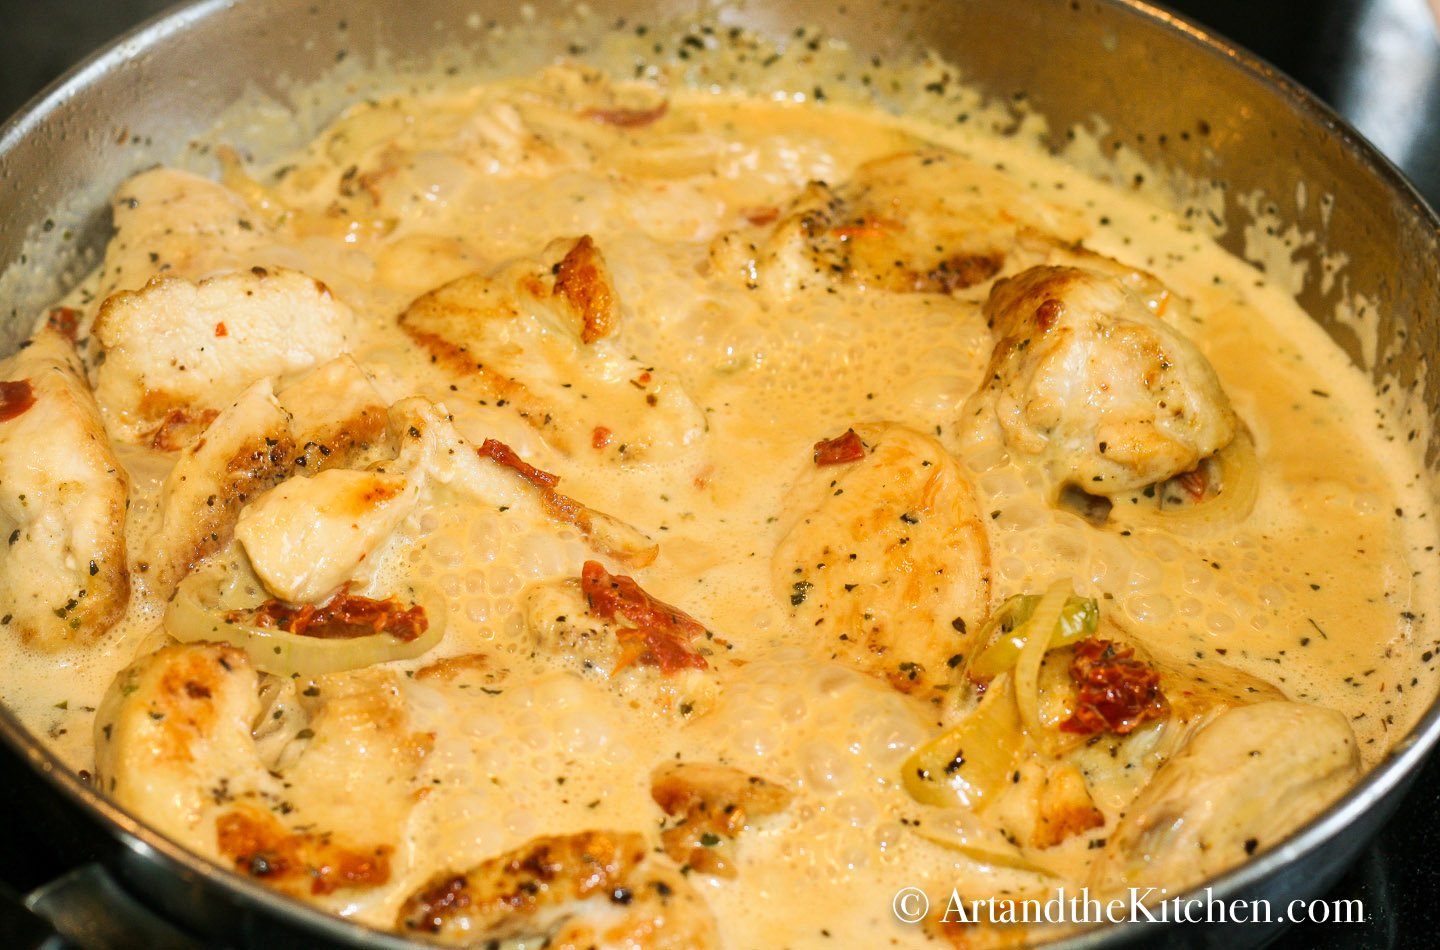 Chicken in a creamy sun-dried tomato sauce simmering in a stainless steel skillet.